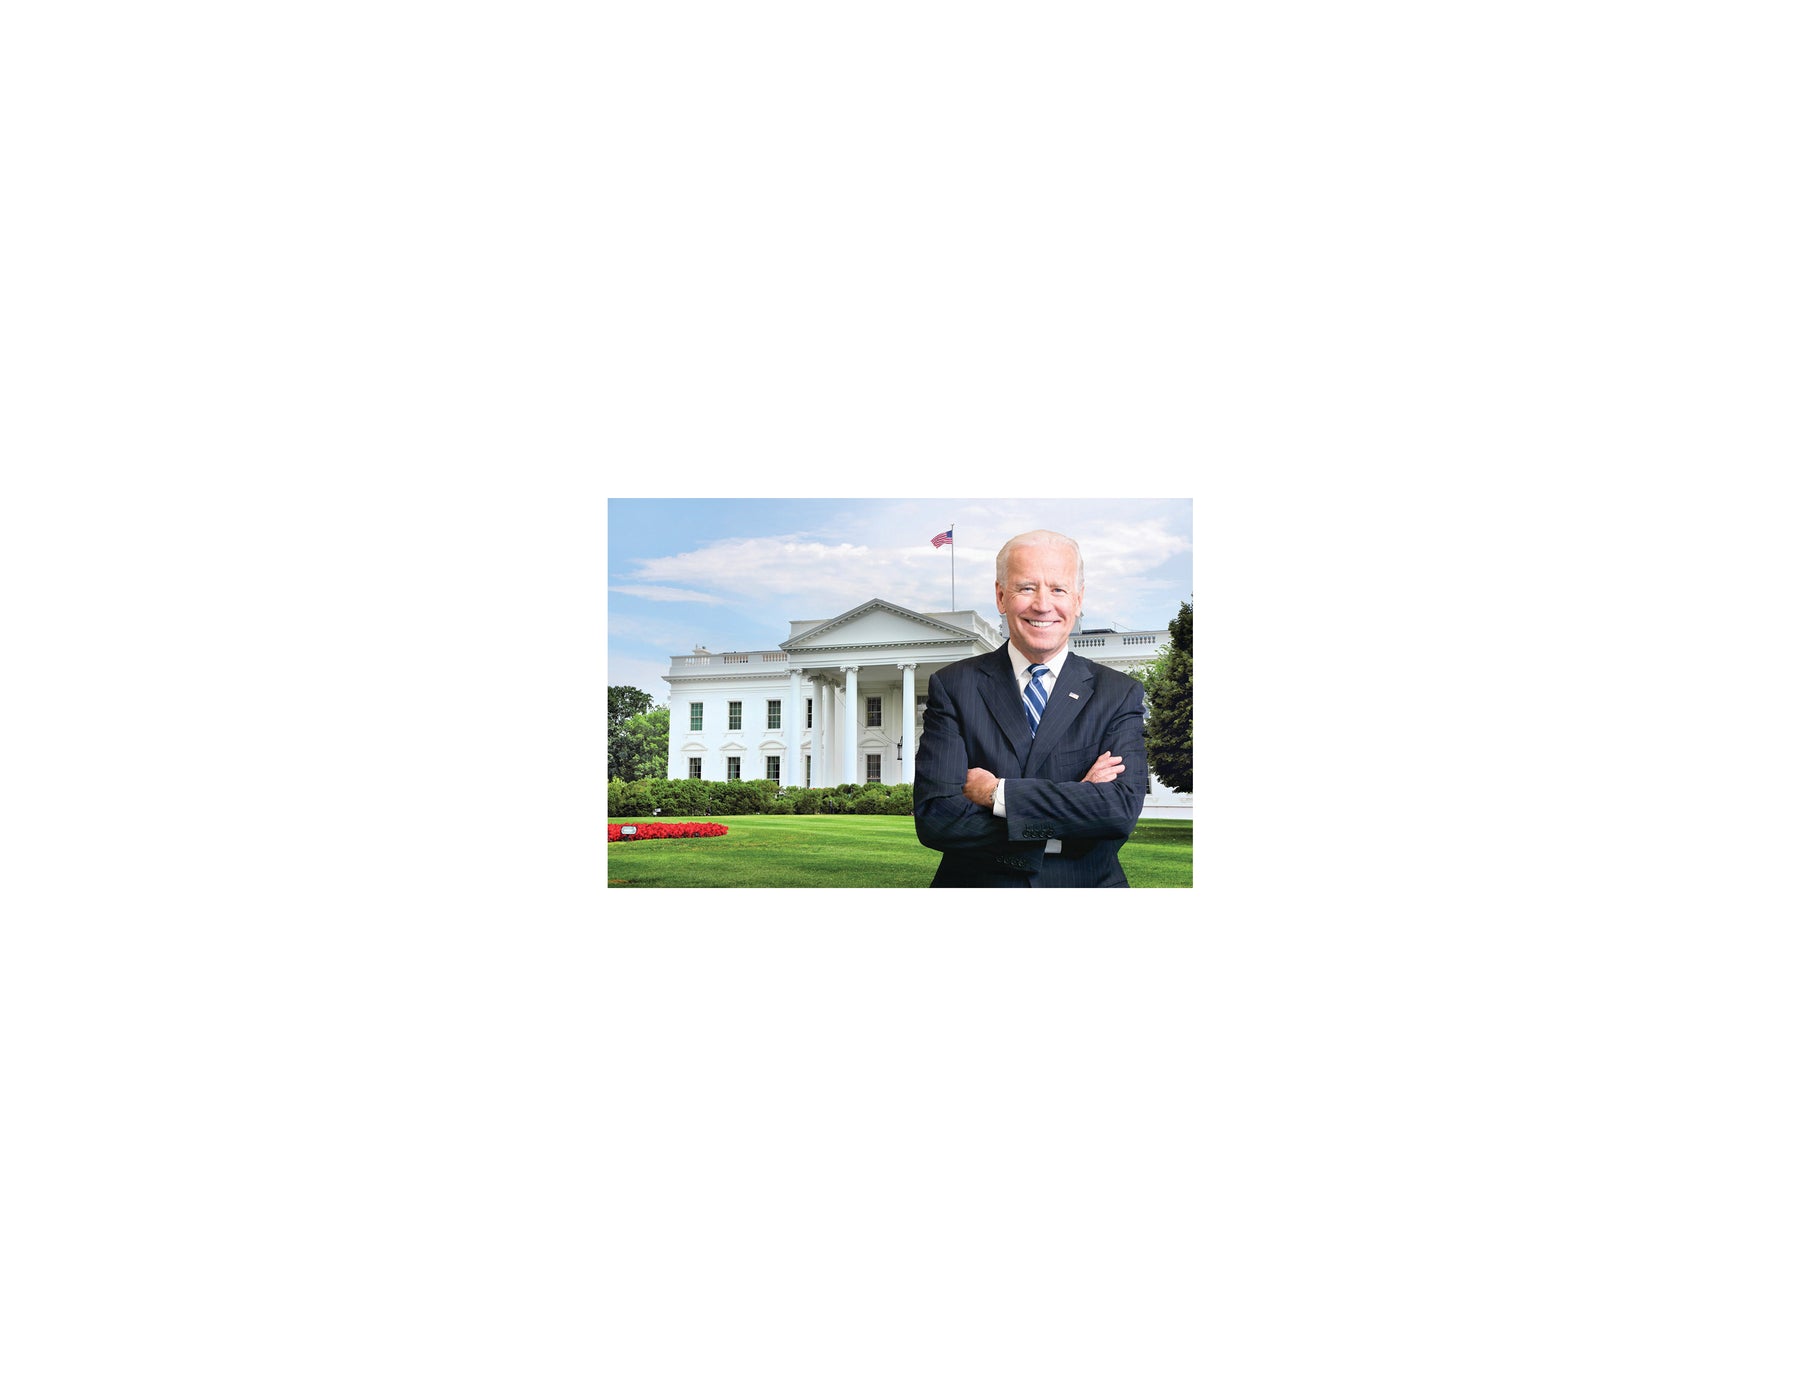 Executive Order 14042: Ensuring Adequate COVID Safety Protocols for Federal Contractors